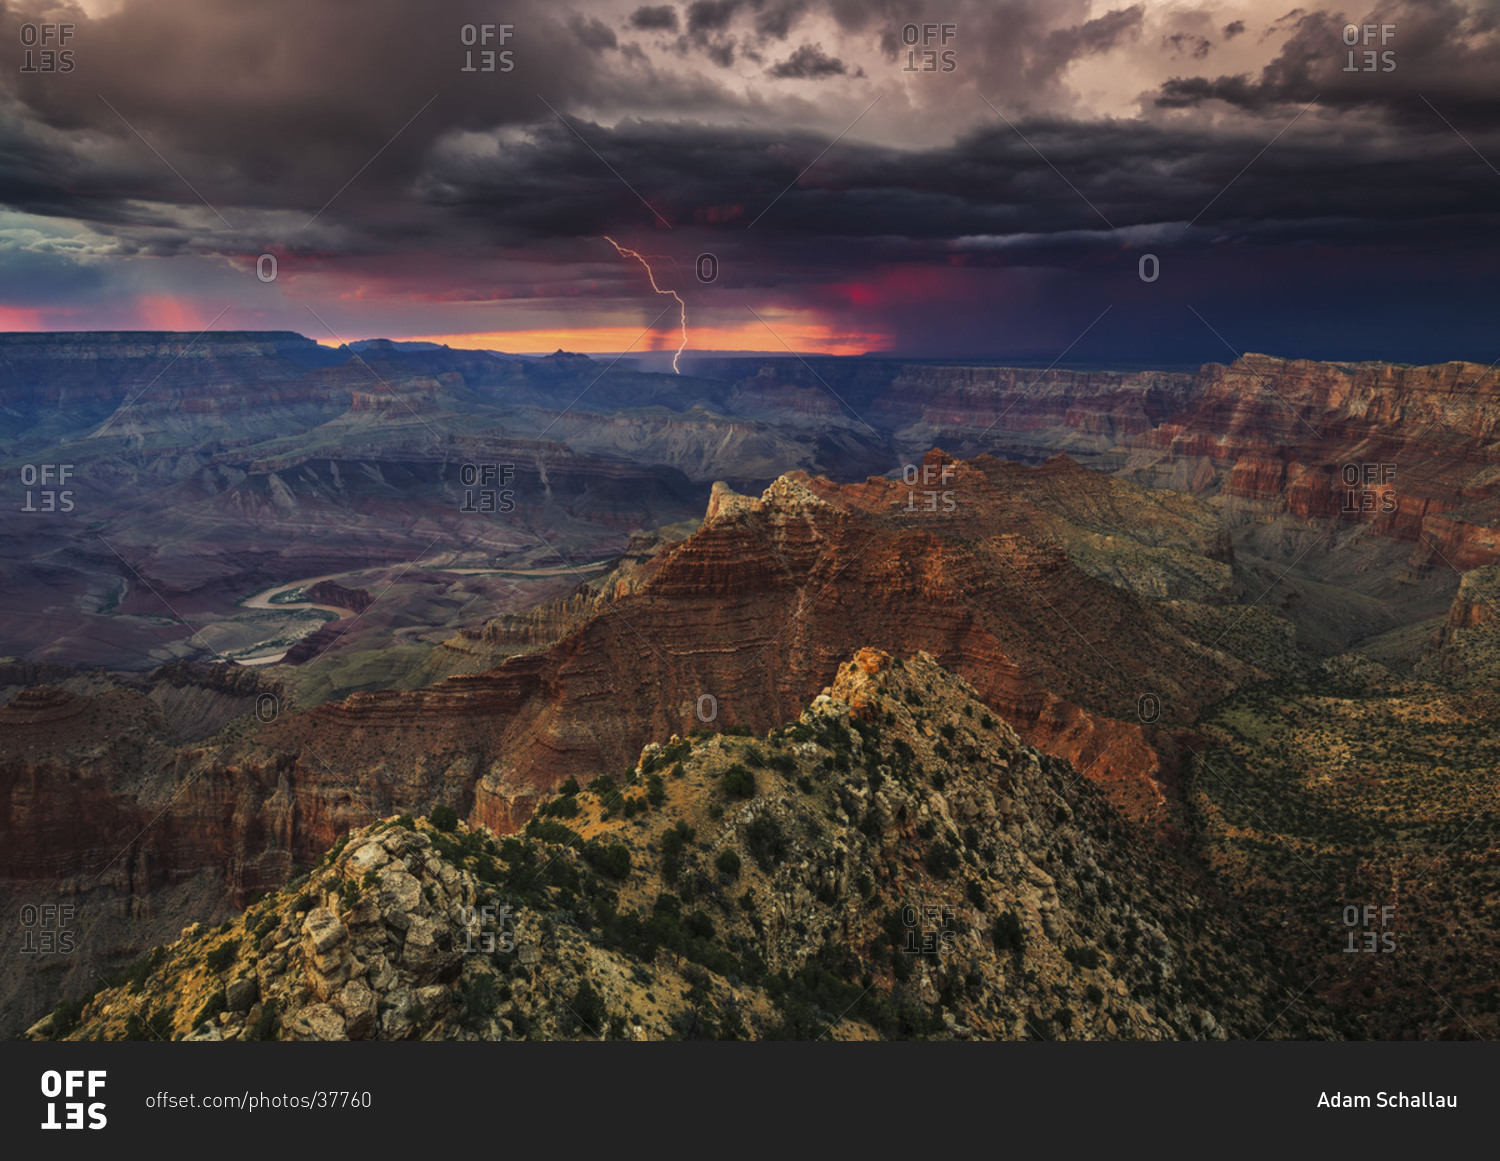 Lightning erupts from a summer thunderstorm over the Grand Canyon and the Colorado River